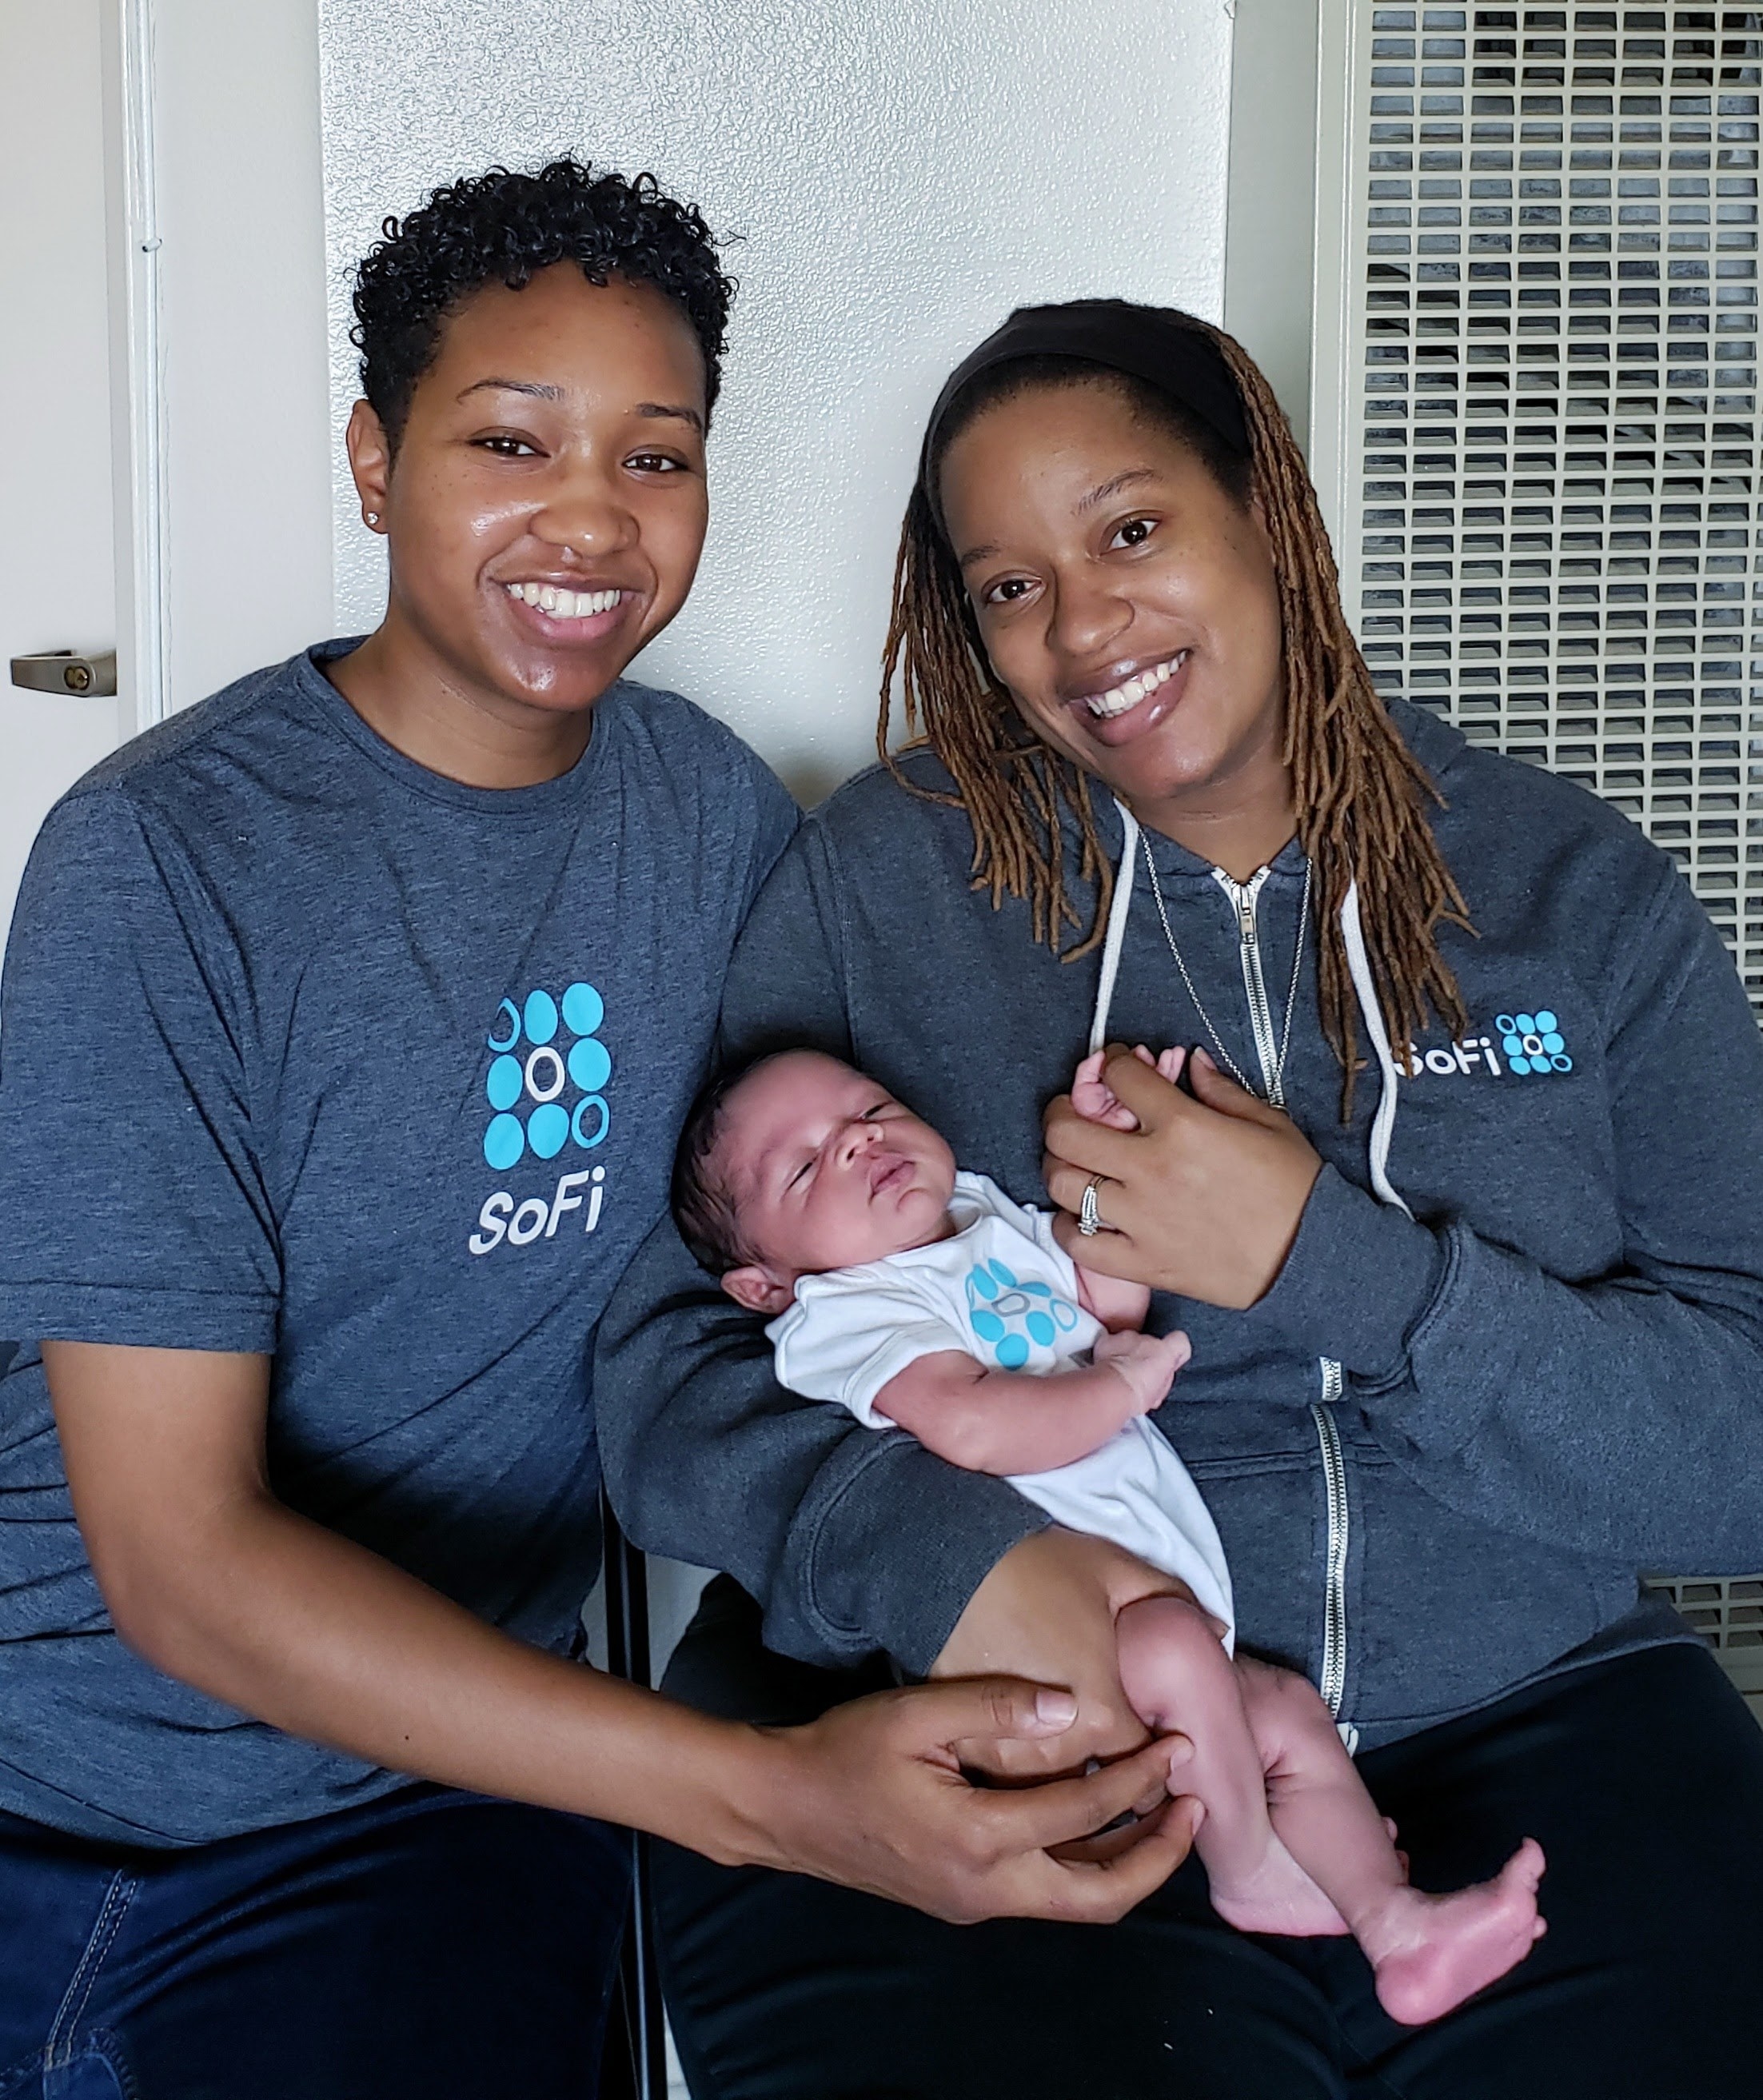 Precious and her wife with their baby